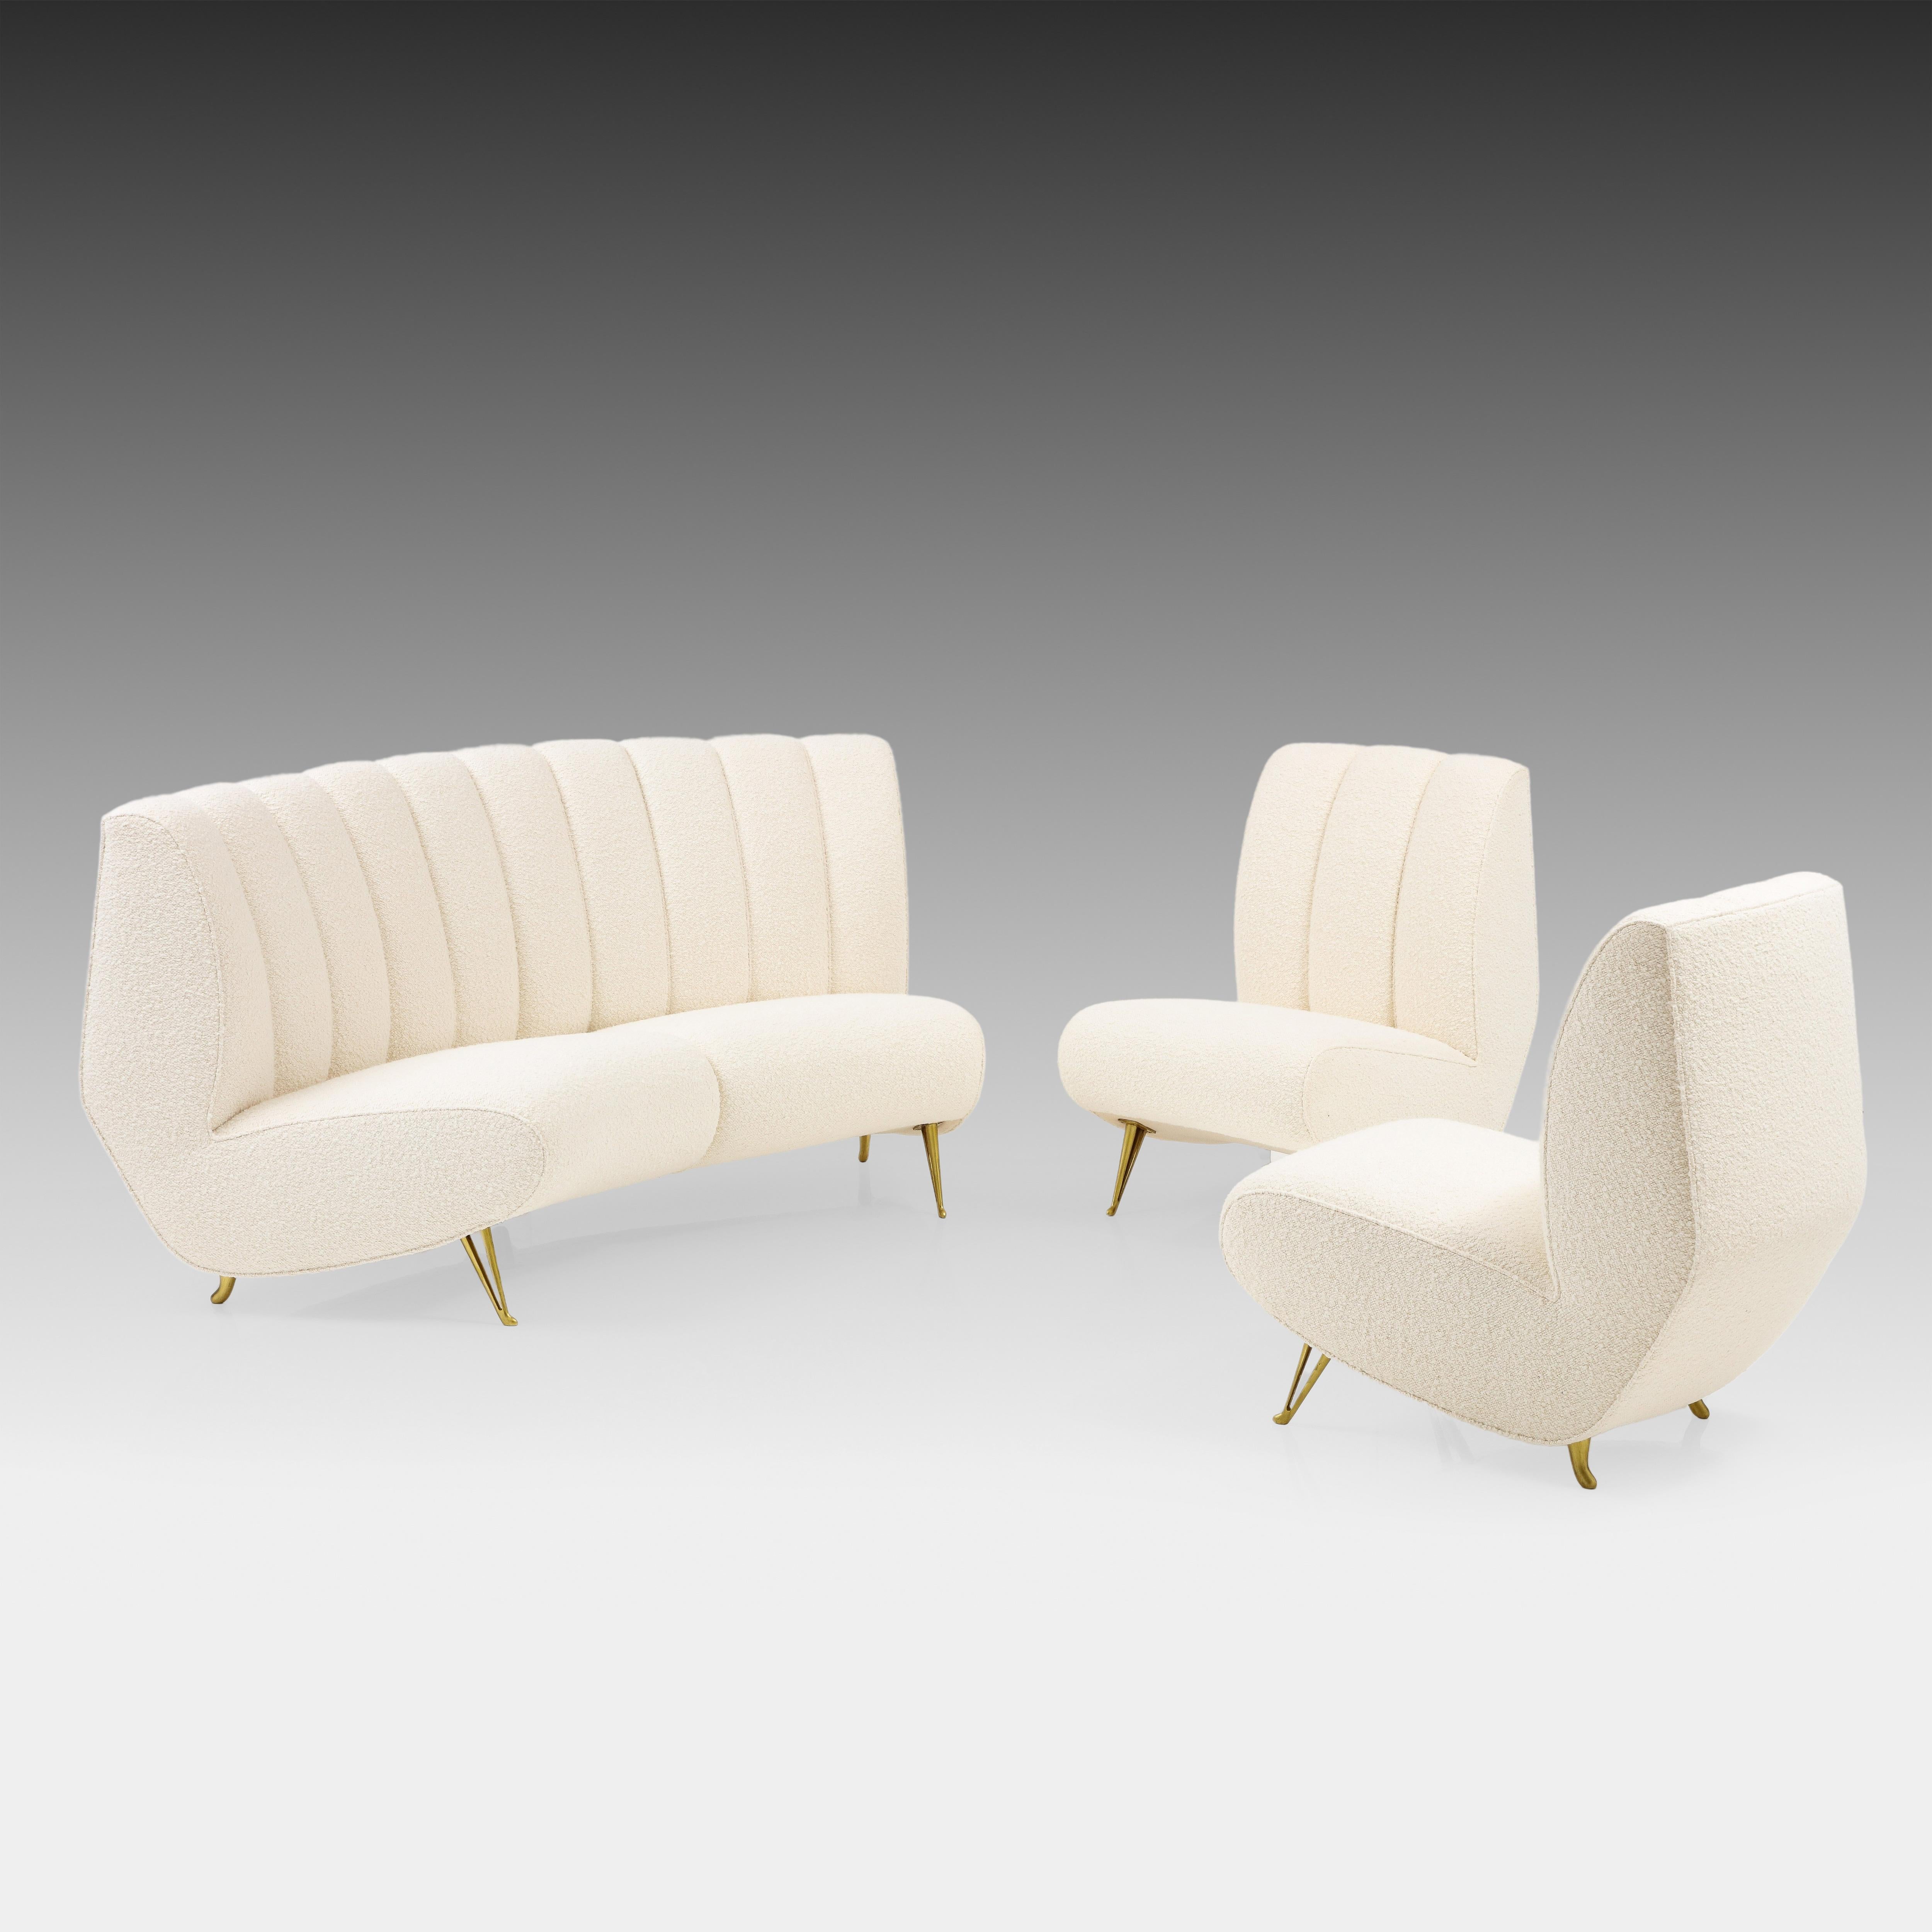 ISA Bergamo rare exquisite set consisting of curved channel back settee and pair of lounge or slipper chairs in ivory bouclé, Italy, 1950s. This seatings' chic legs - ISA Bergamo's signature cutout gilt metal front legs and saber back legs - exude